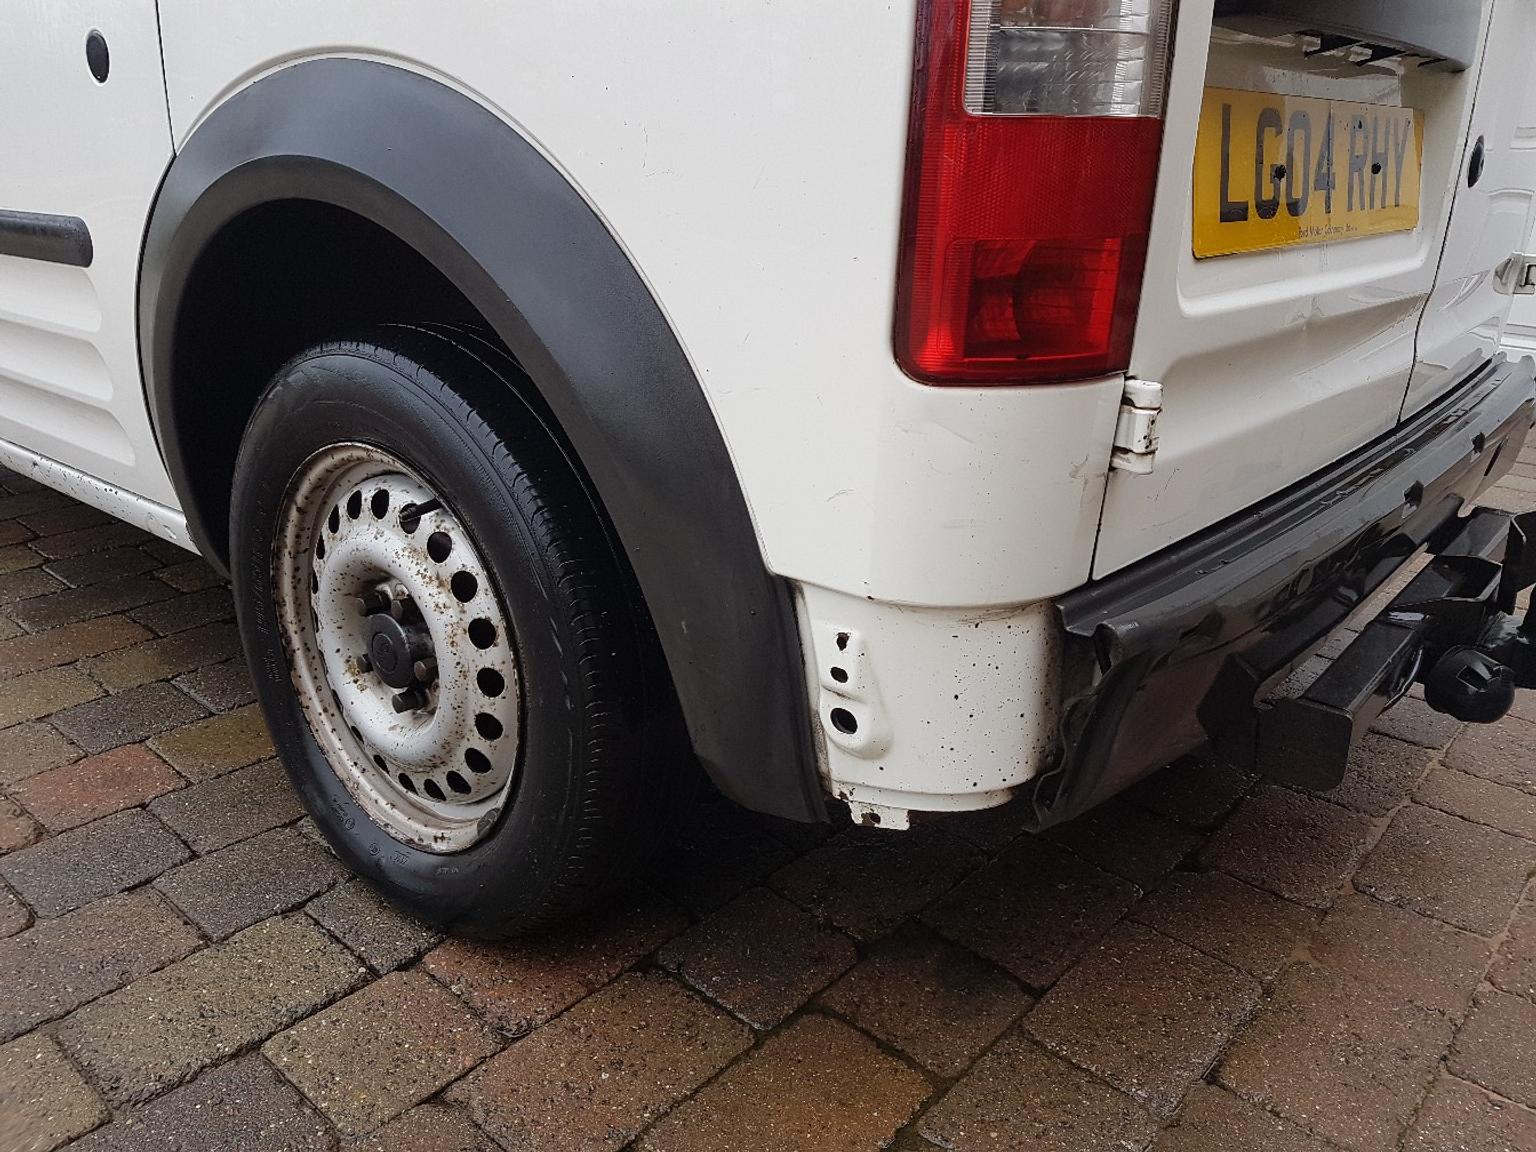 Ford Transit Connect EX BT spare or repair in RH13 Horsham for £700.00 for sale | Shpock